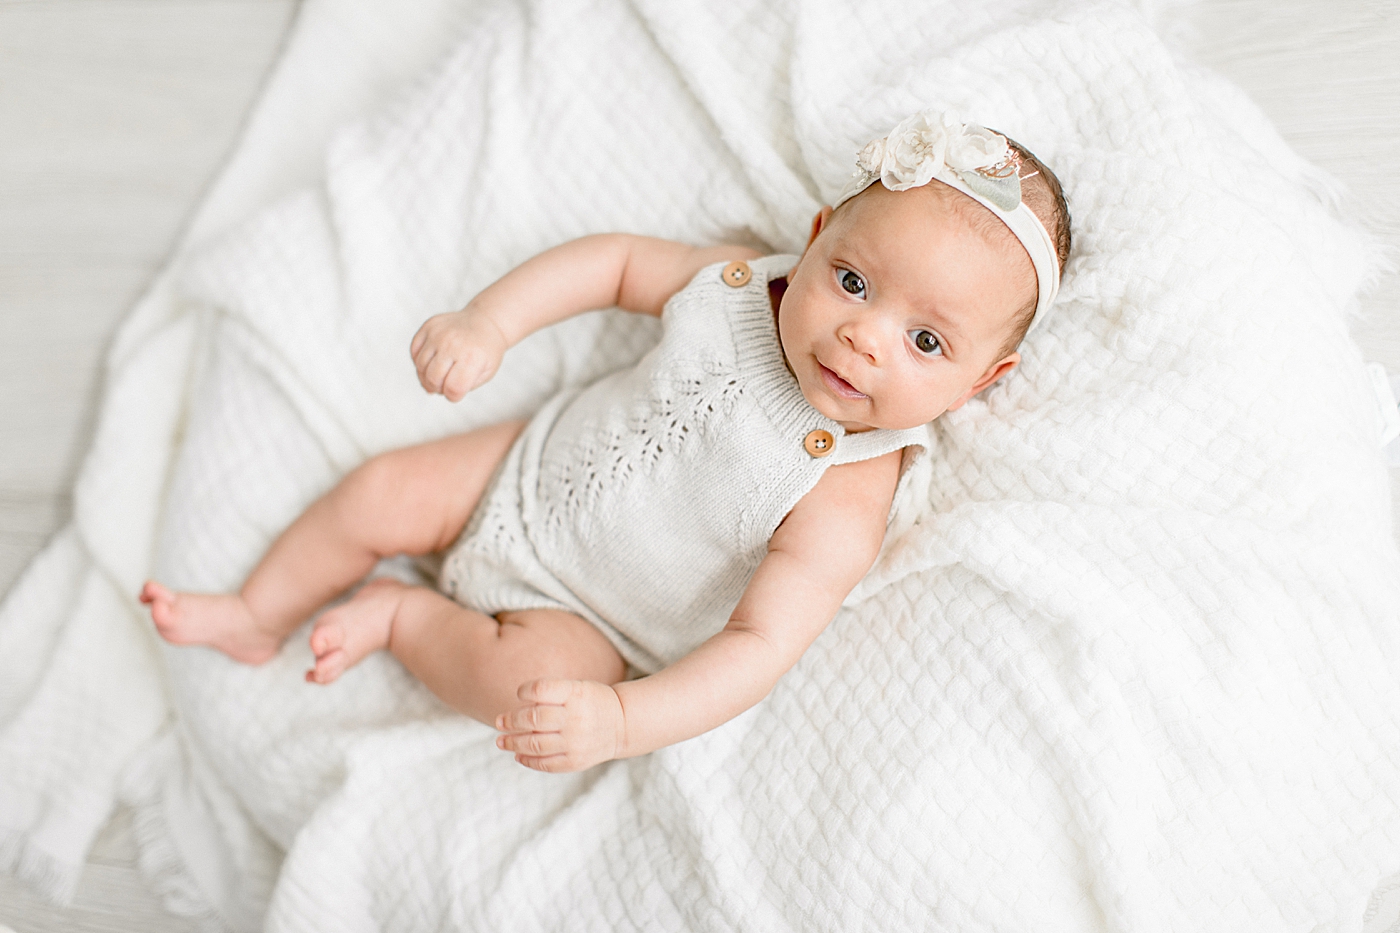 Baby girl newborn session in Tampa, FL. Photo by Brittany Elise Photography.